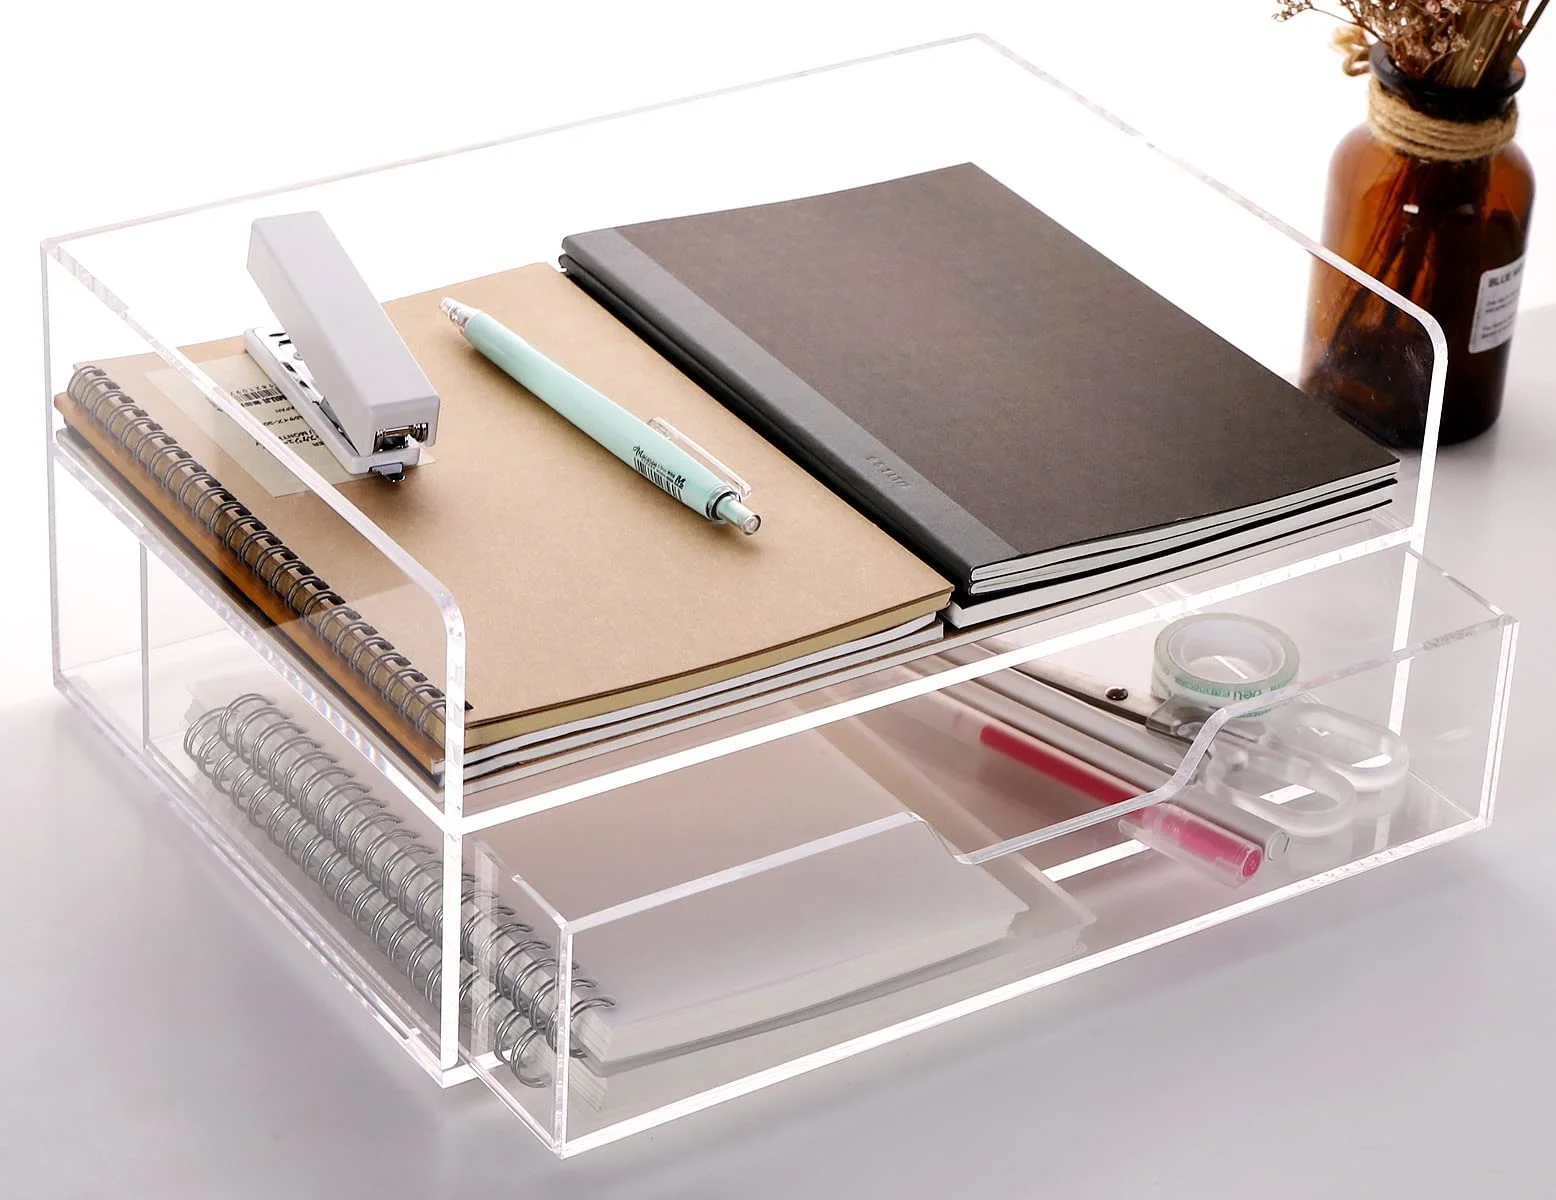 SANRUI Acrylic Desk Organizer with Drawer , 2 Tier Paper Tray for Letter/A4 Printer Paper/Magazine, Home Office Supplies